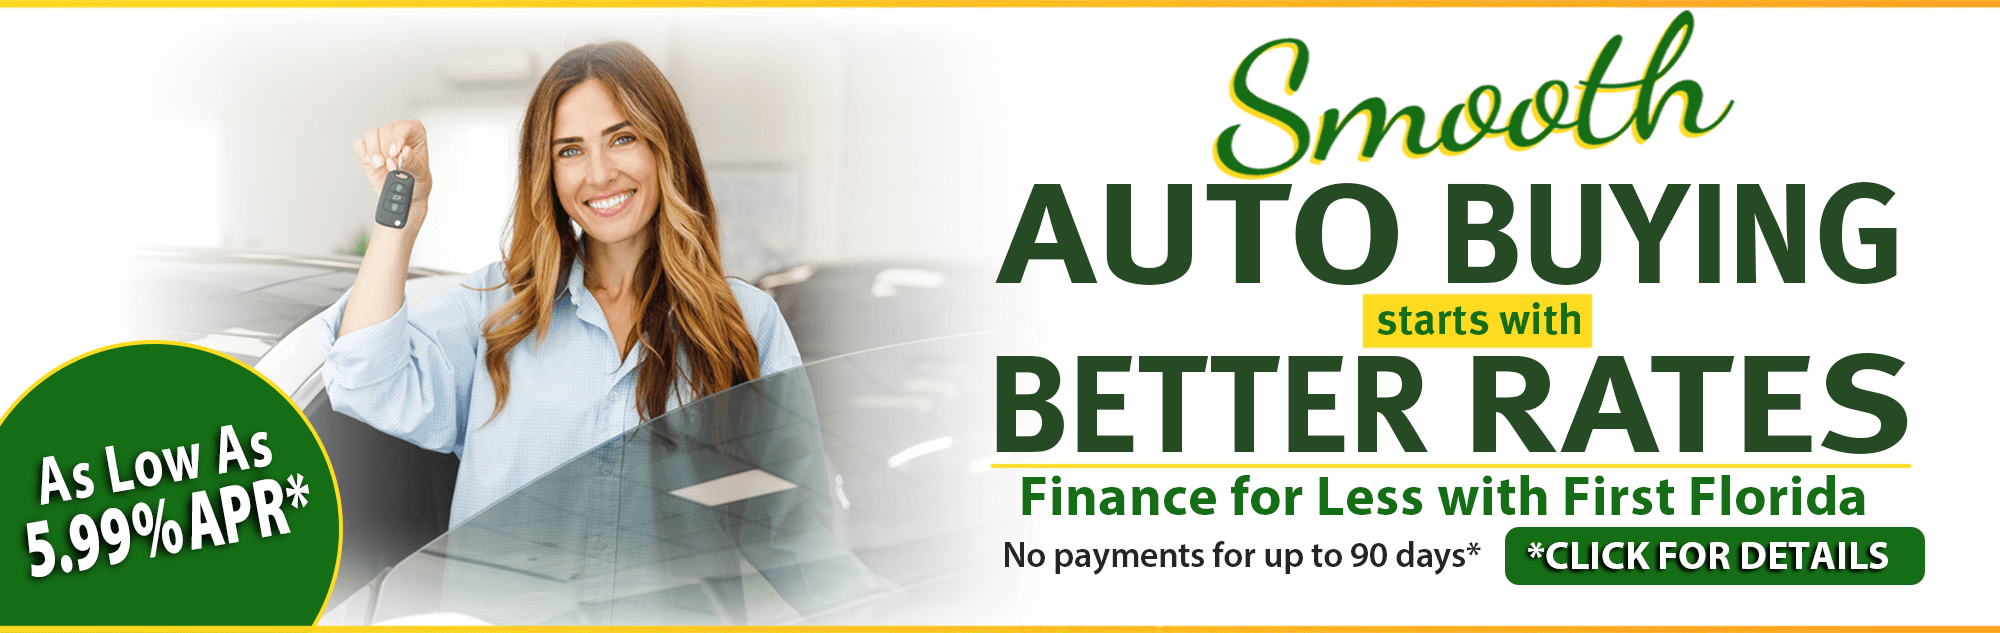 Smooth Auto Buying Starts with Better Rates - Finance for Less with First Florida - No Payments for up to 90 Days! 